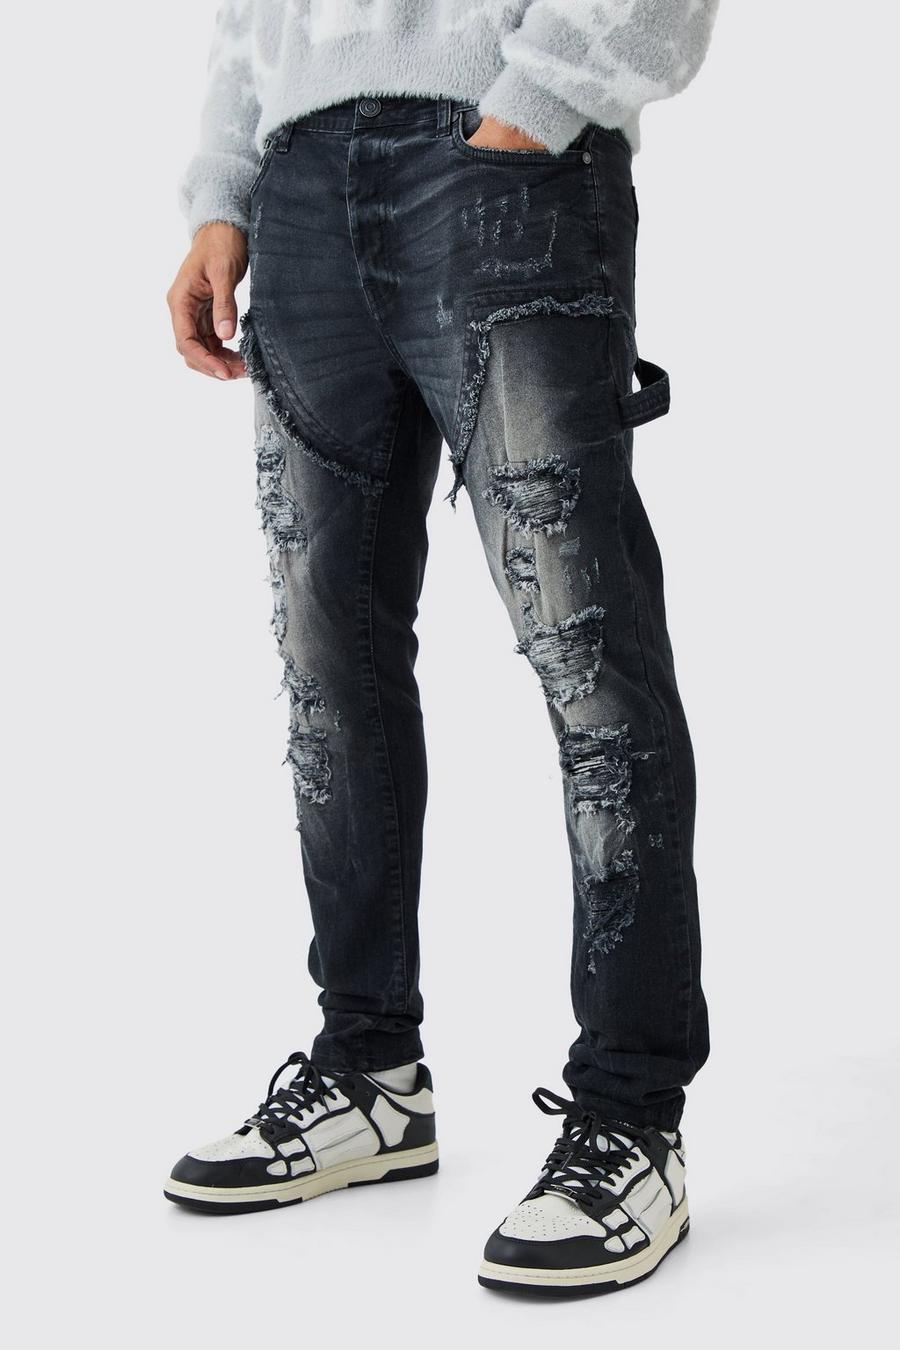 Darc Sport Men's Vicious Skinny Distressed Stretch Jeans With Rips